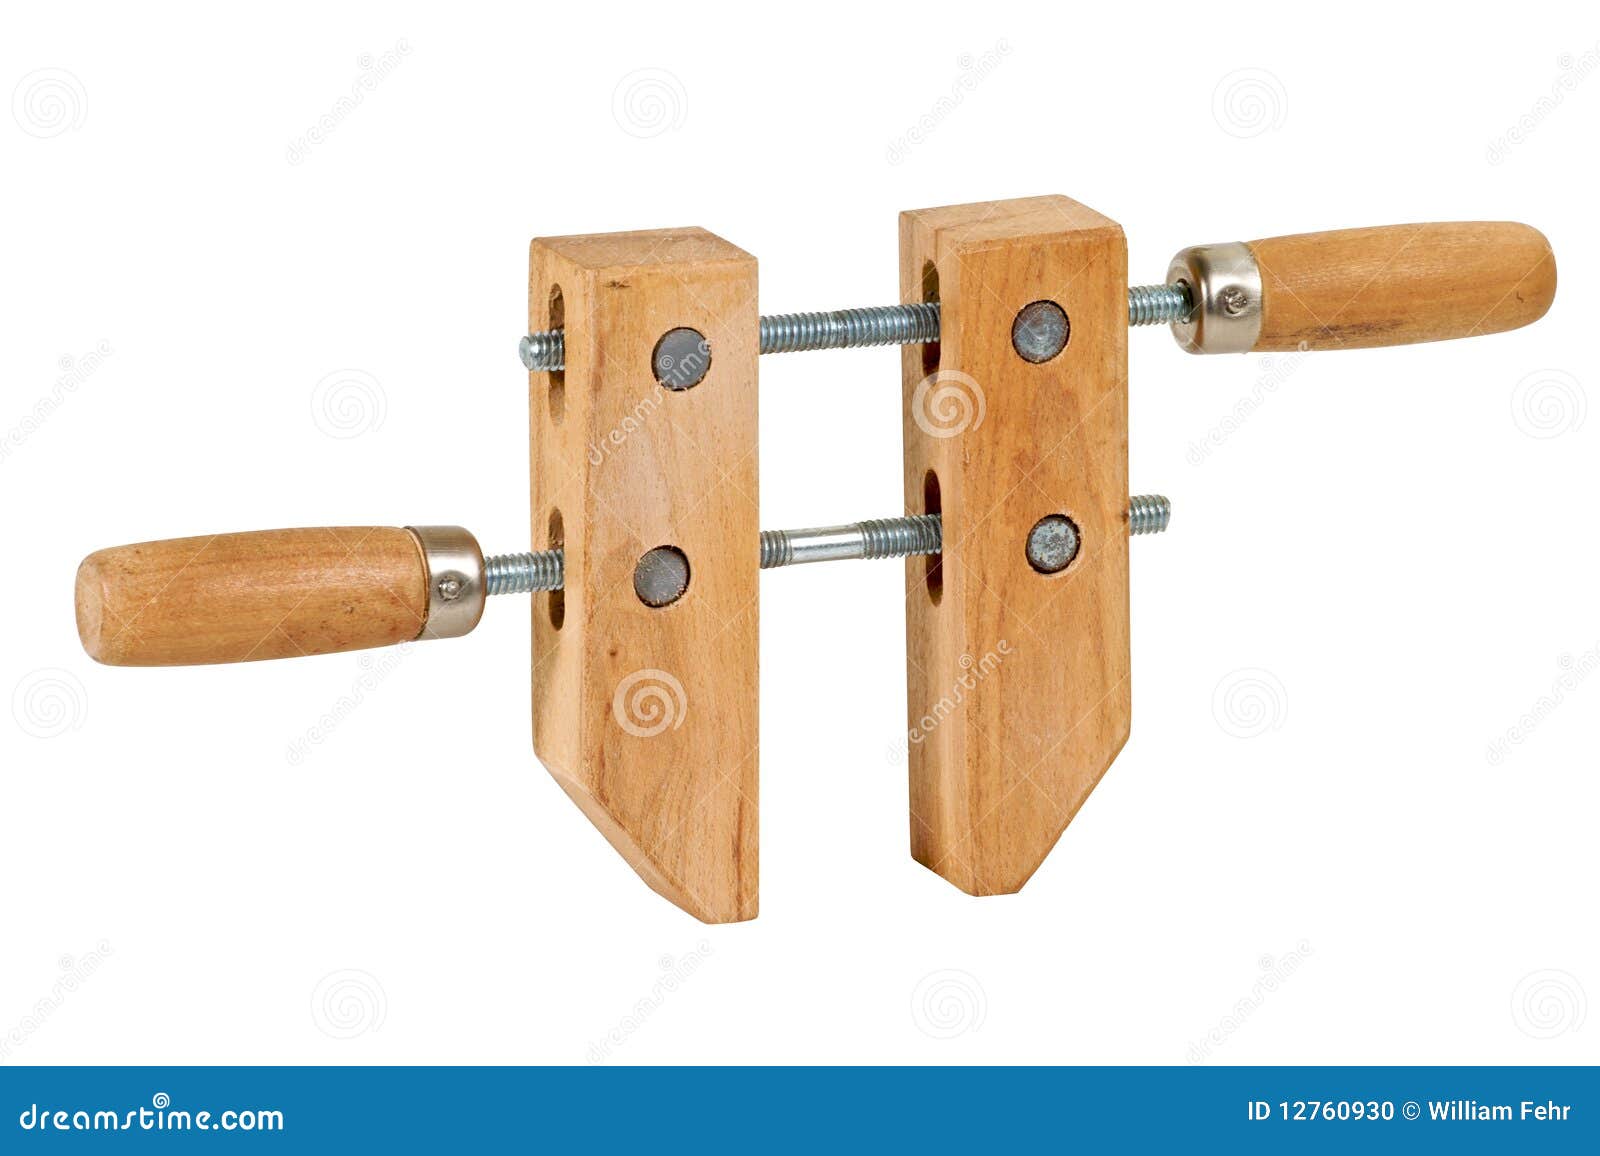 Woodworking Wood Clamps